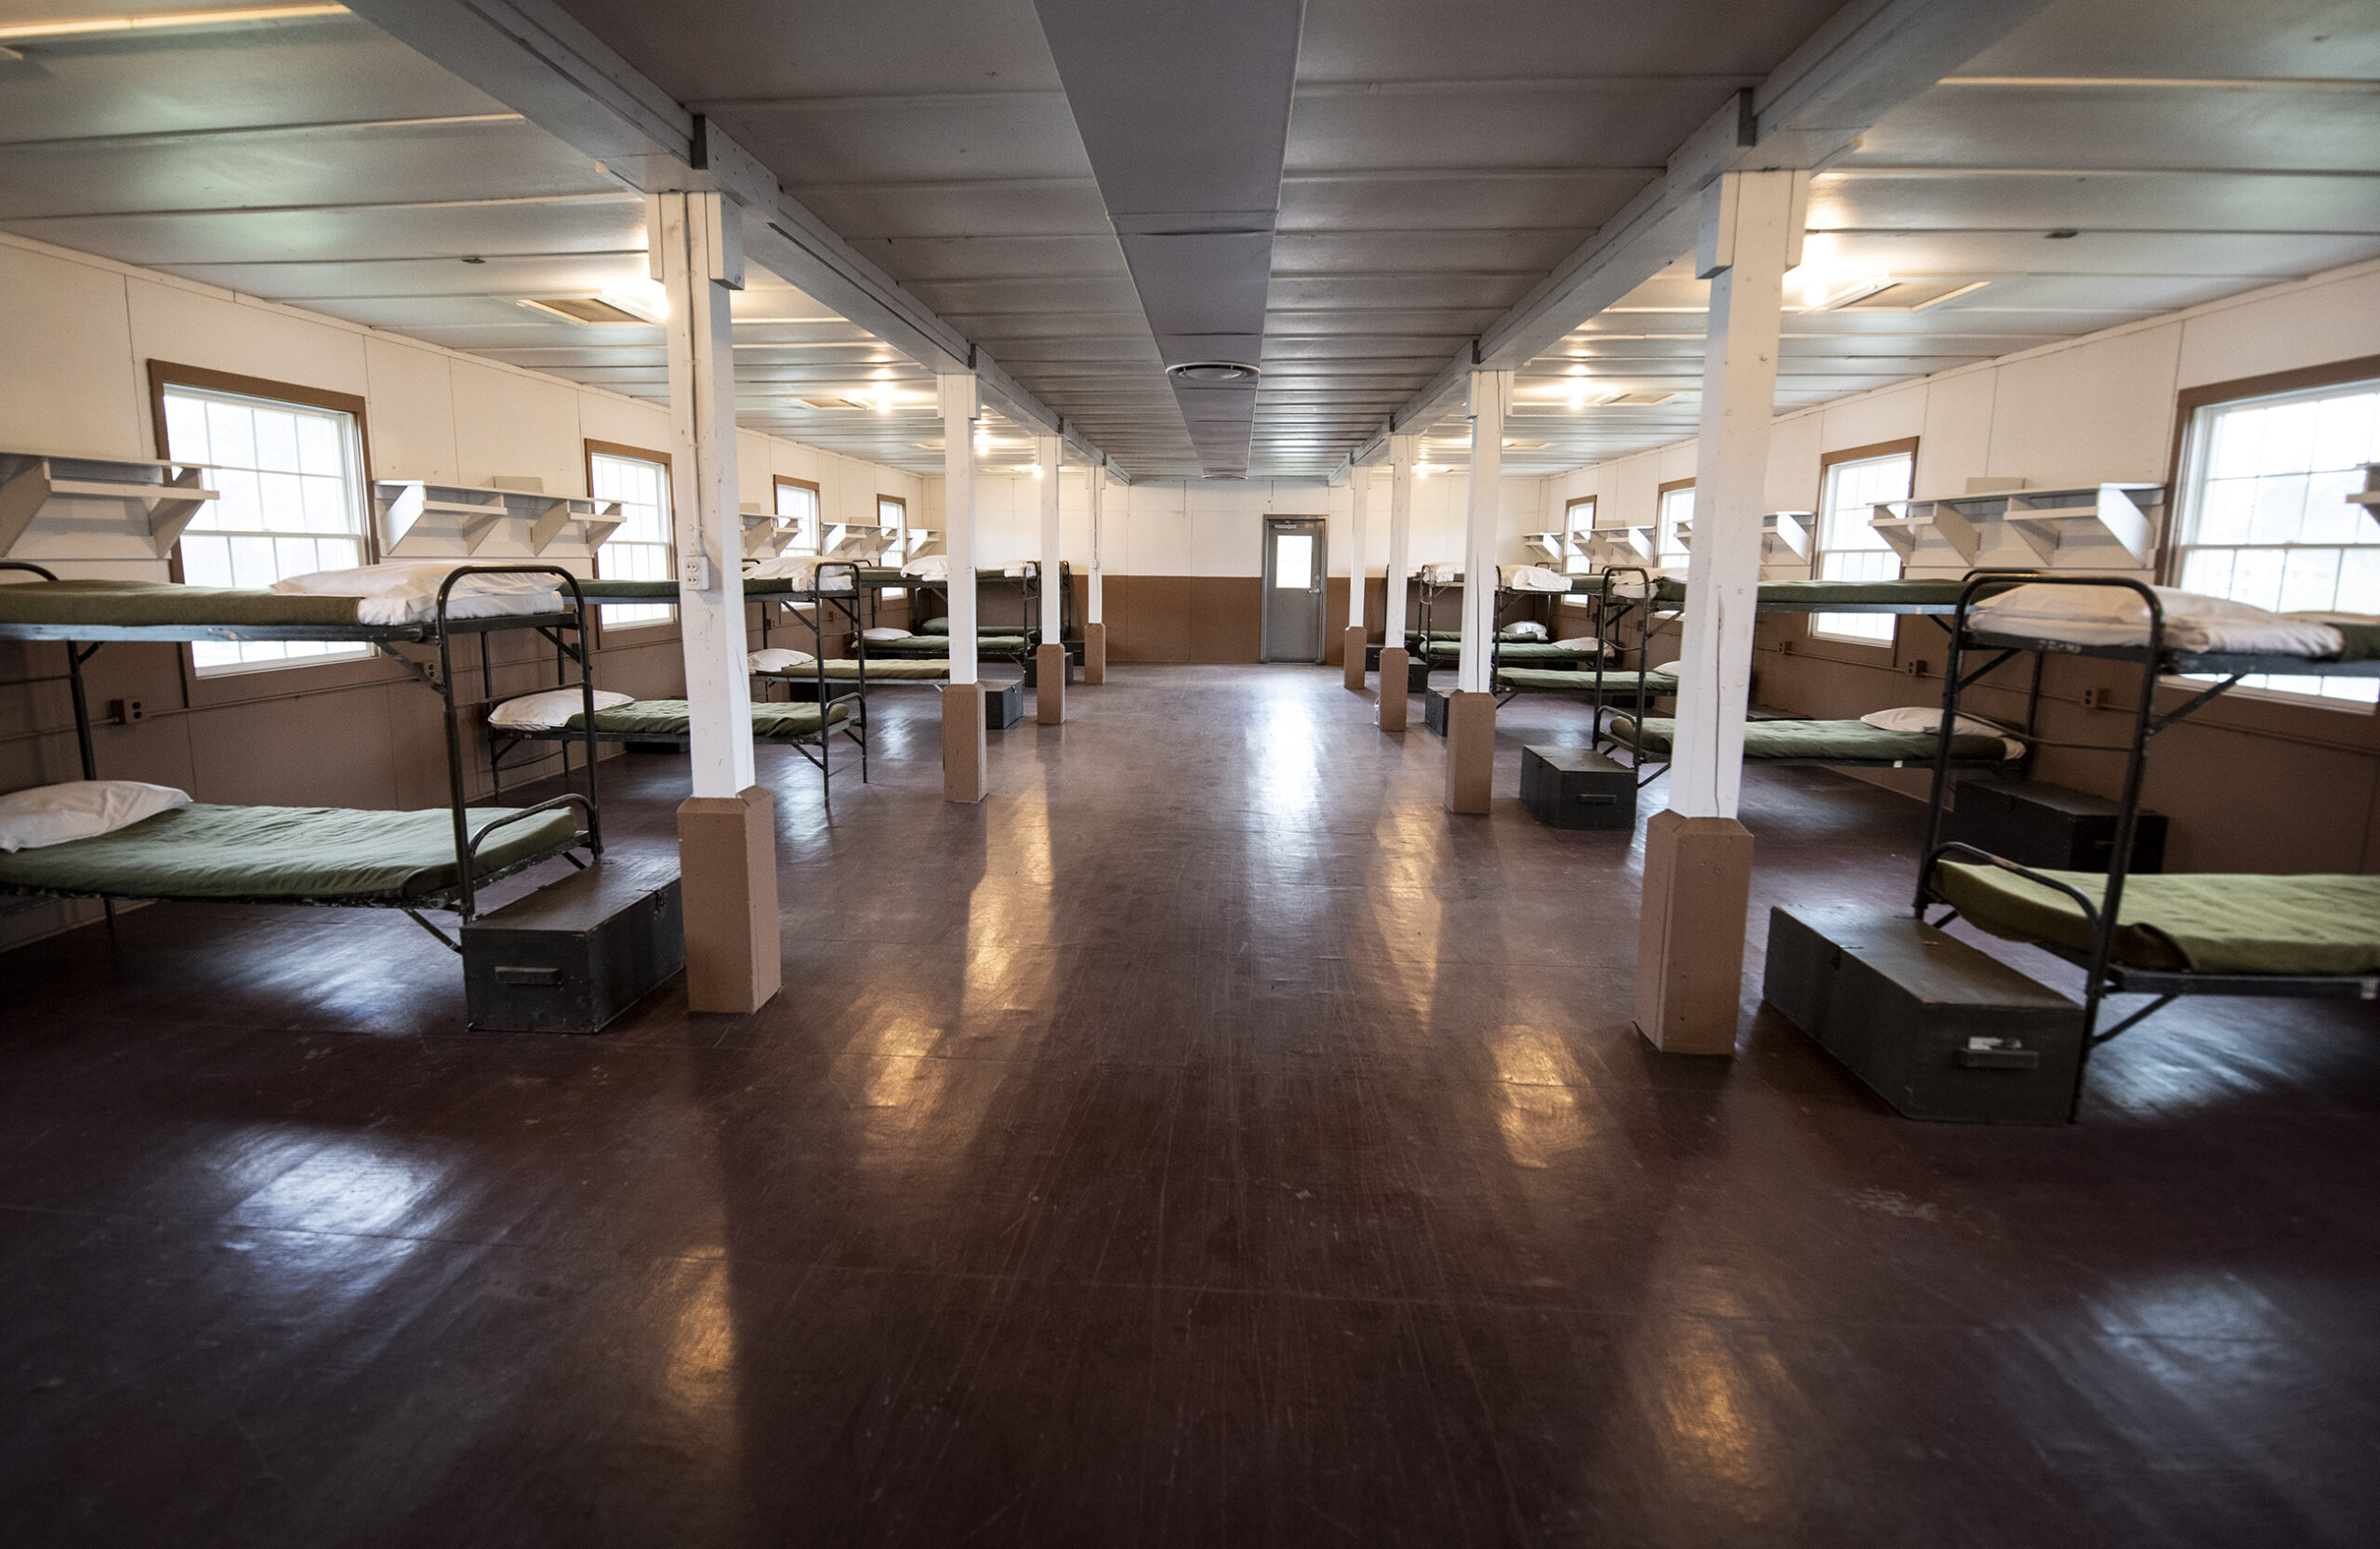 A reconstruction of Fort McCoy barracks on display at a museum